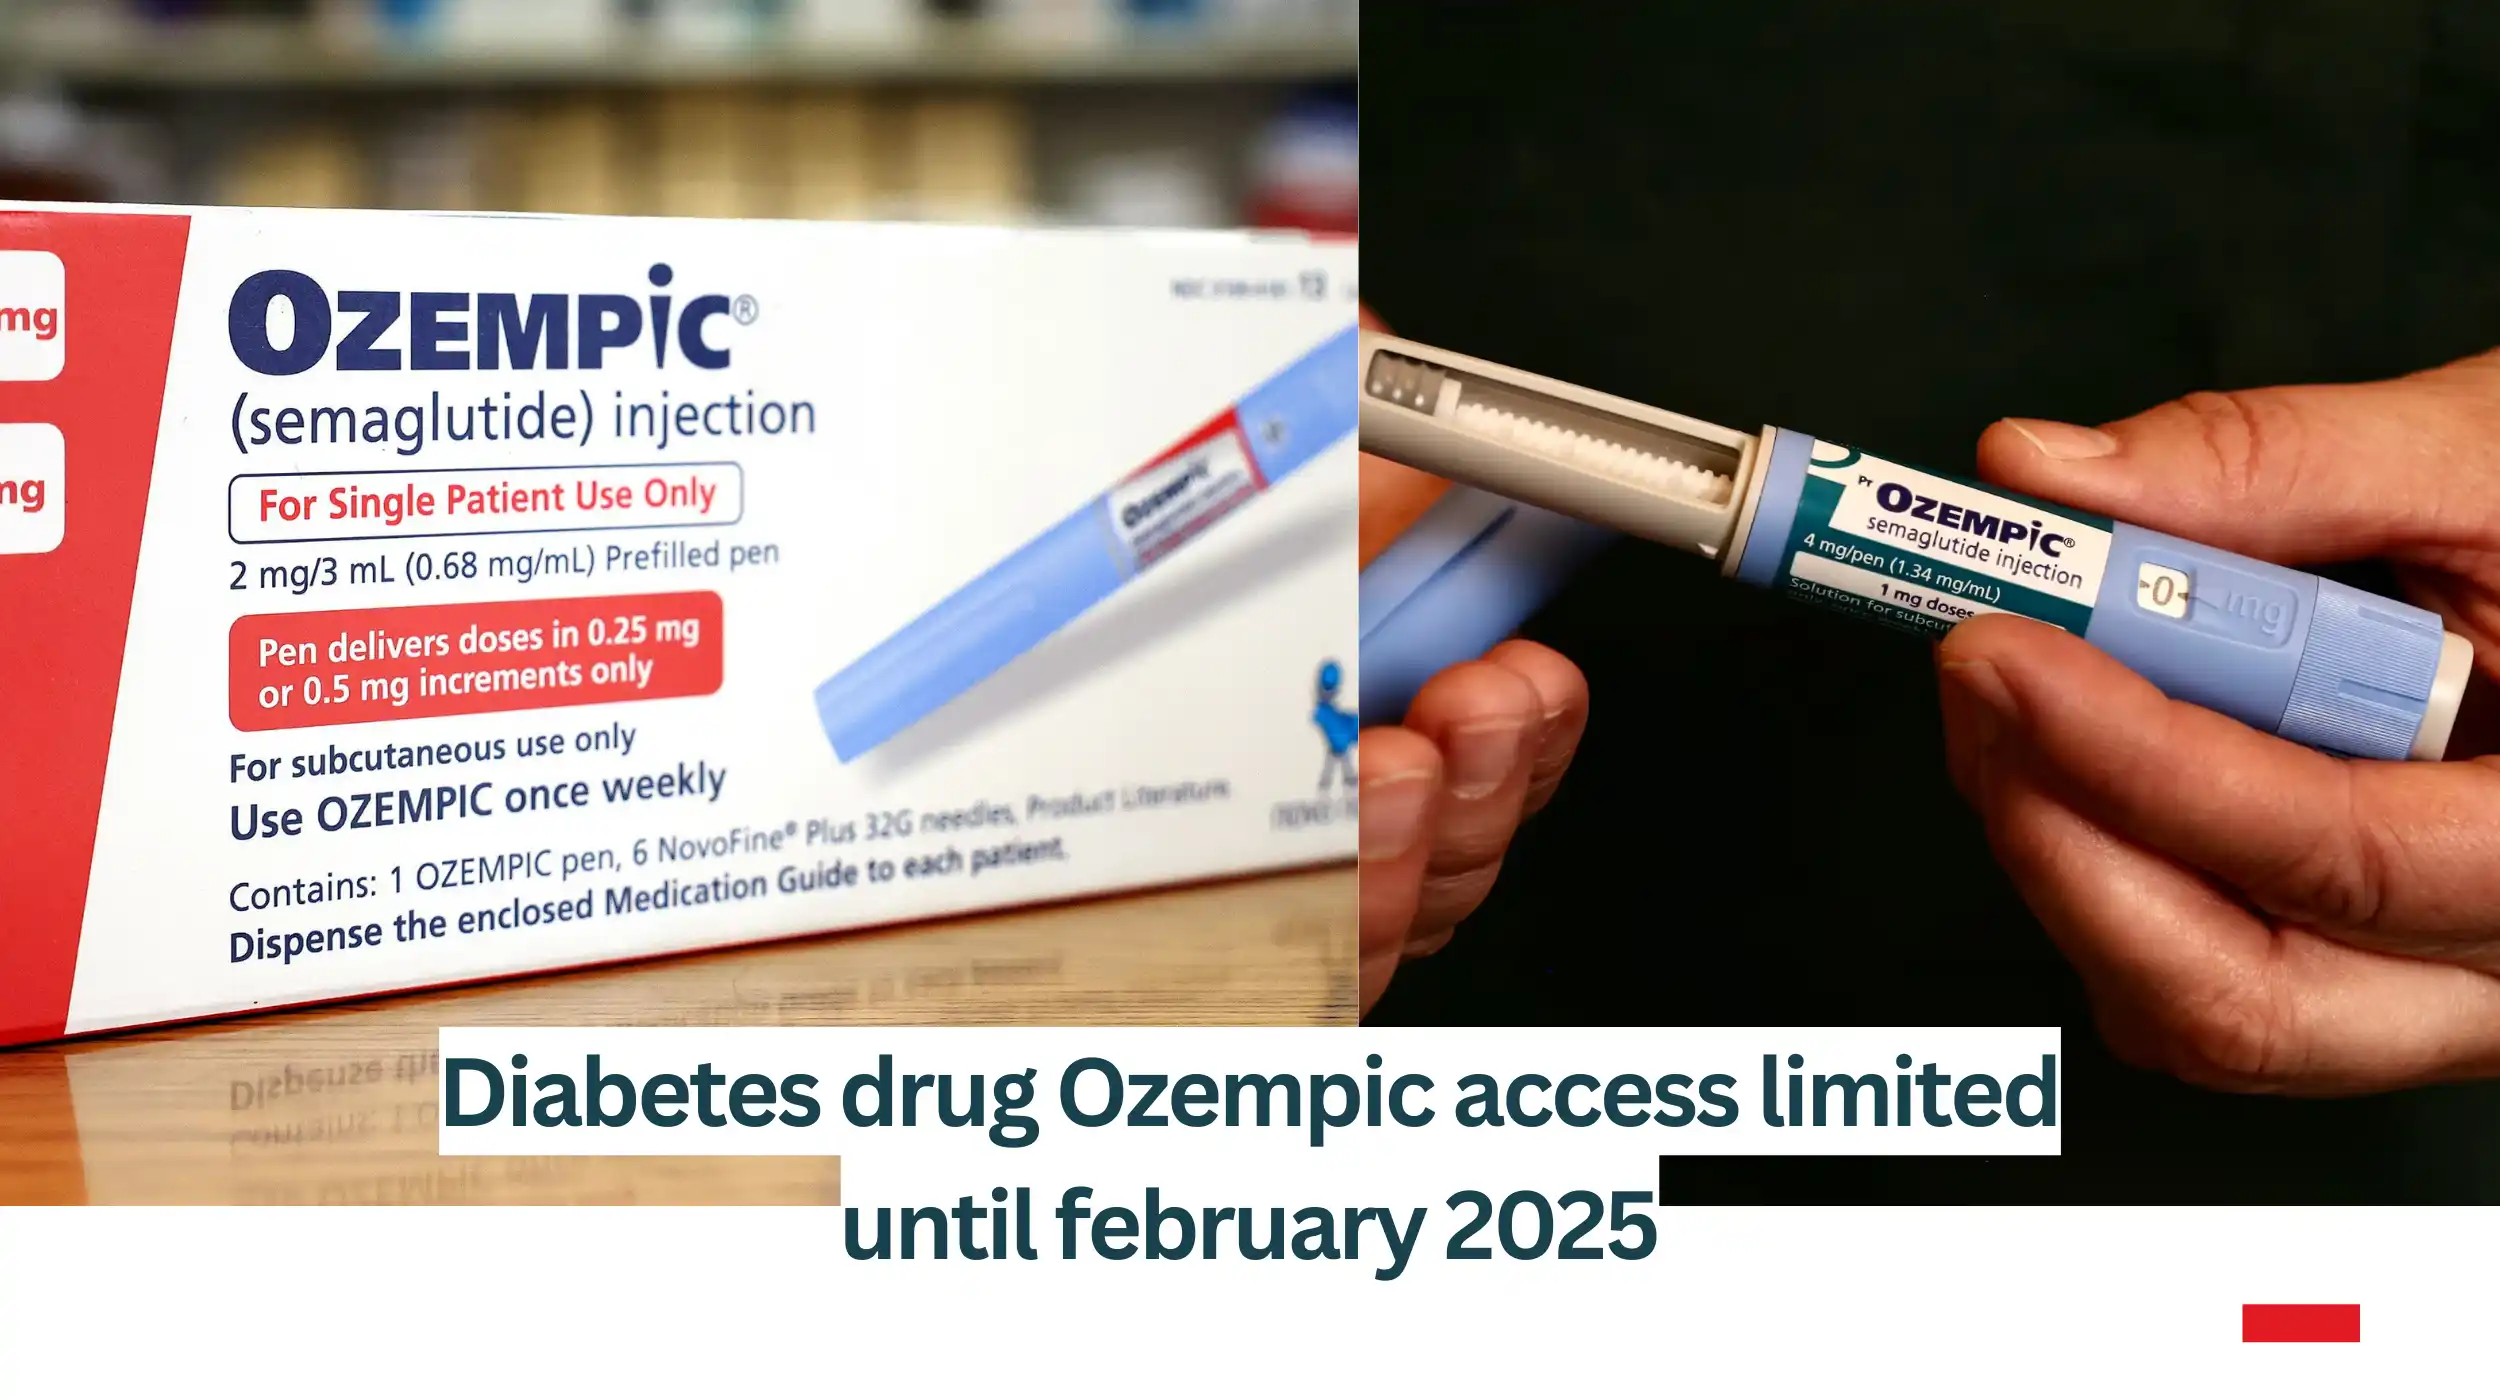 Diabetes-drug-Ozempic-access-limited-until-february-2025